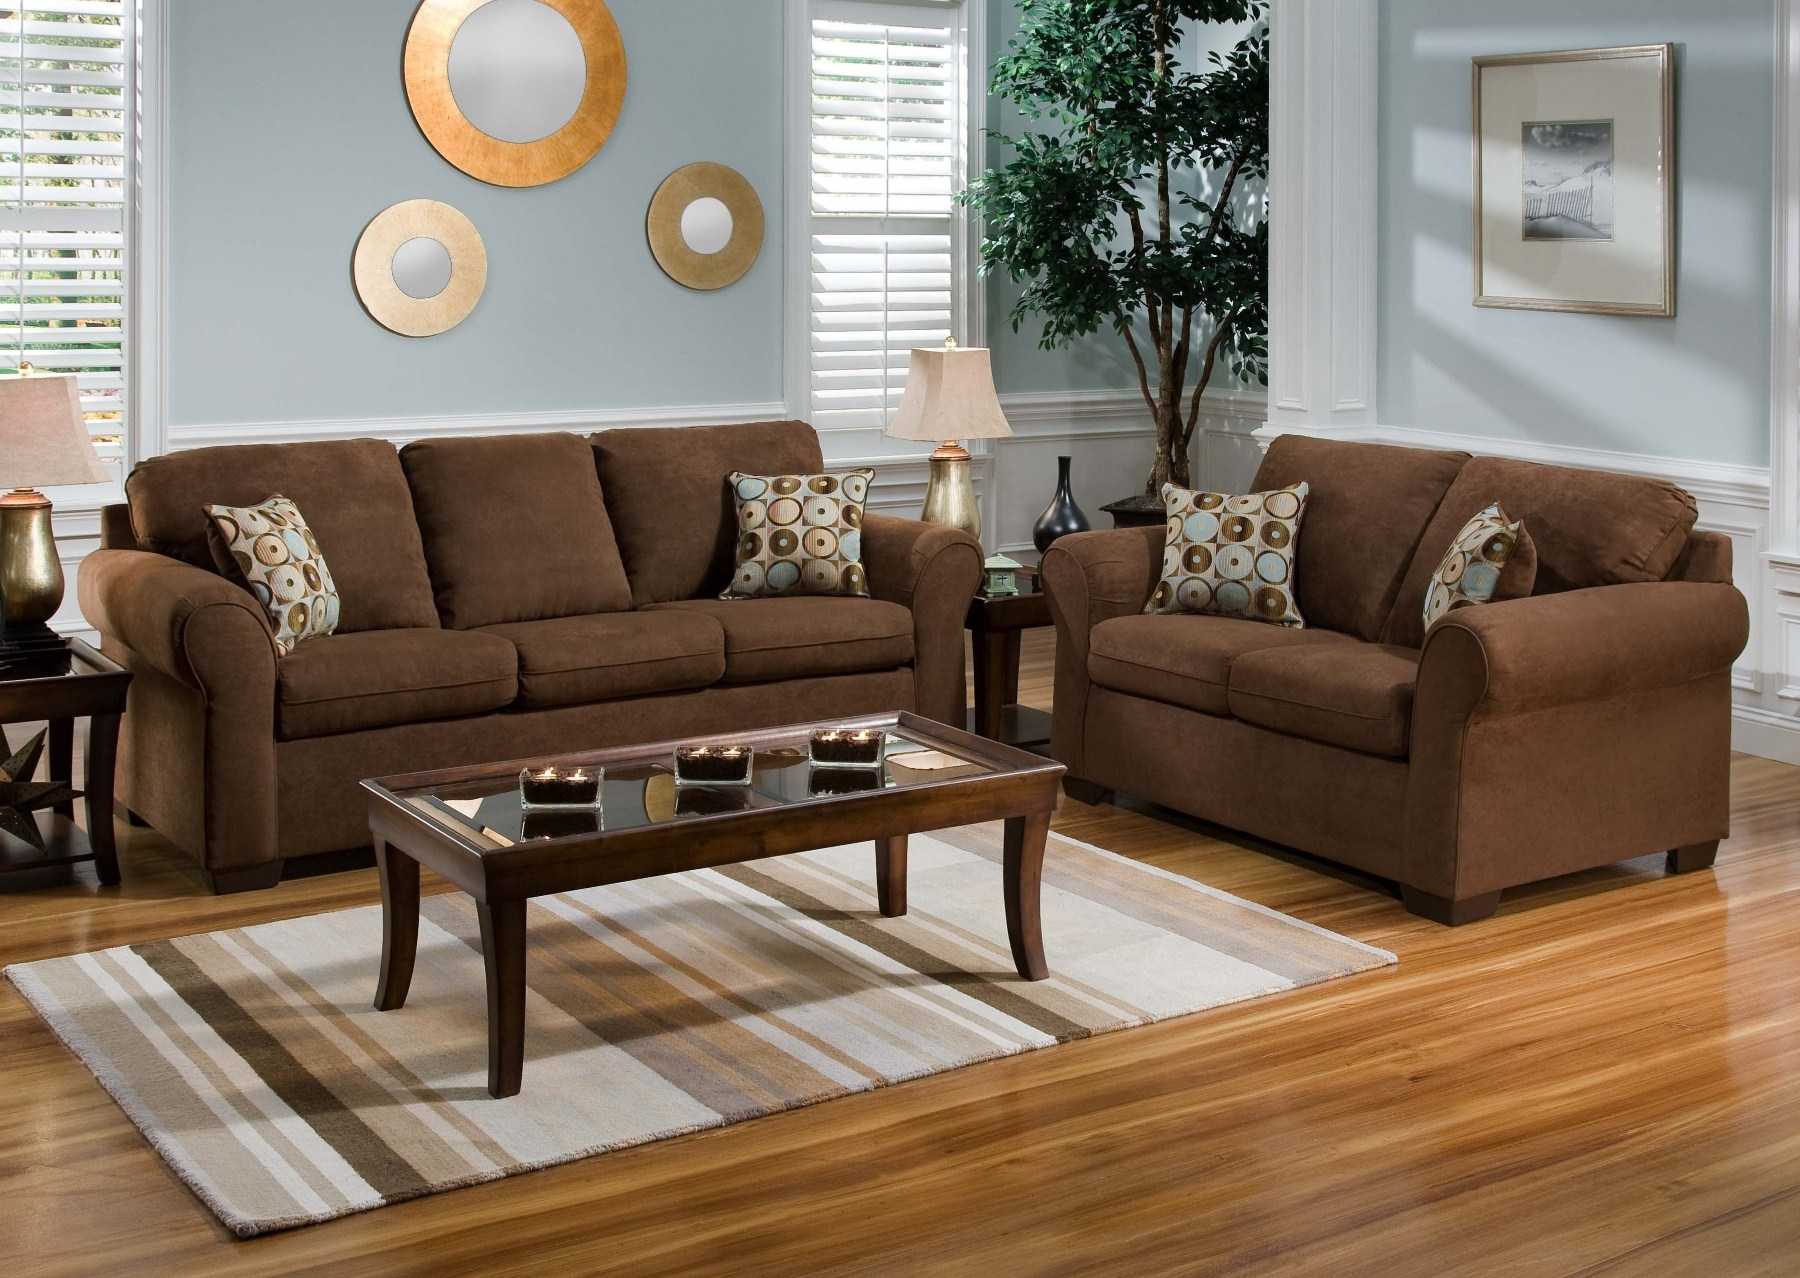 Brown Couch Living Room Ideas